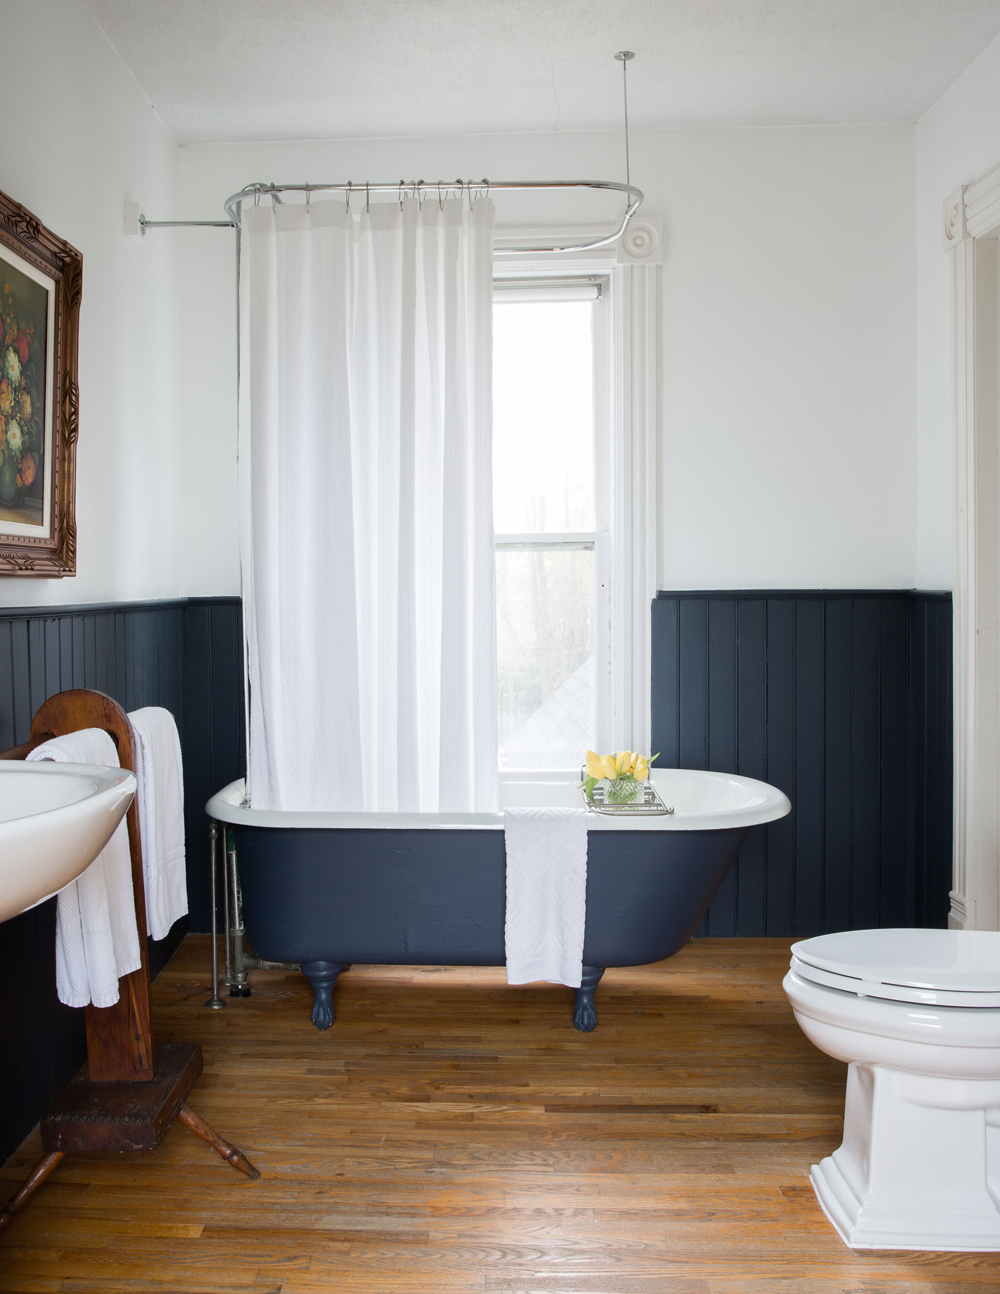 A blue bathroom in a Prince Edward County heritage home